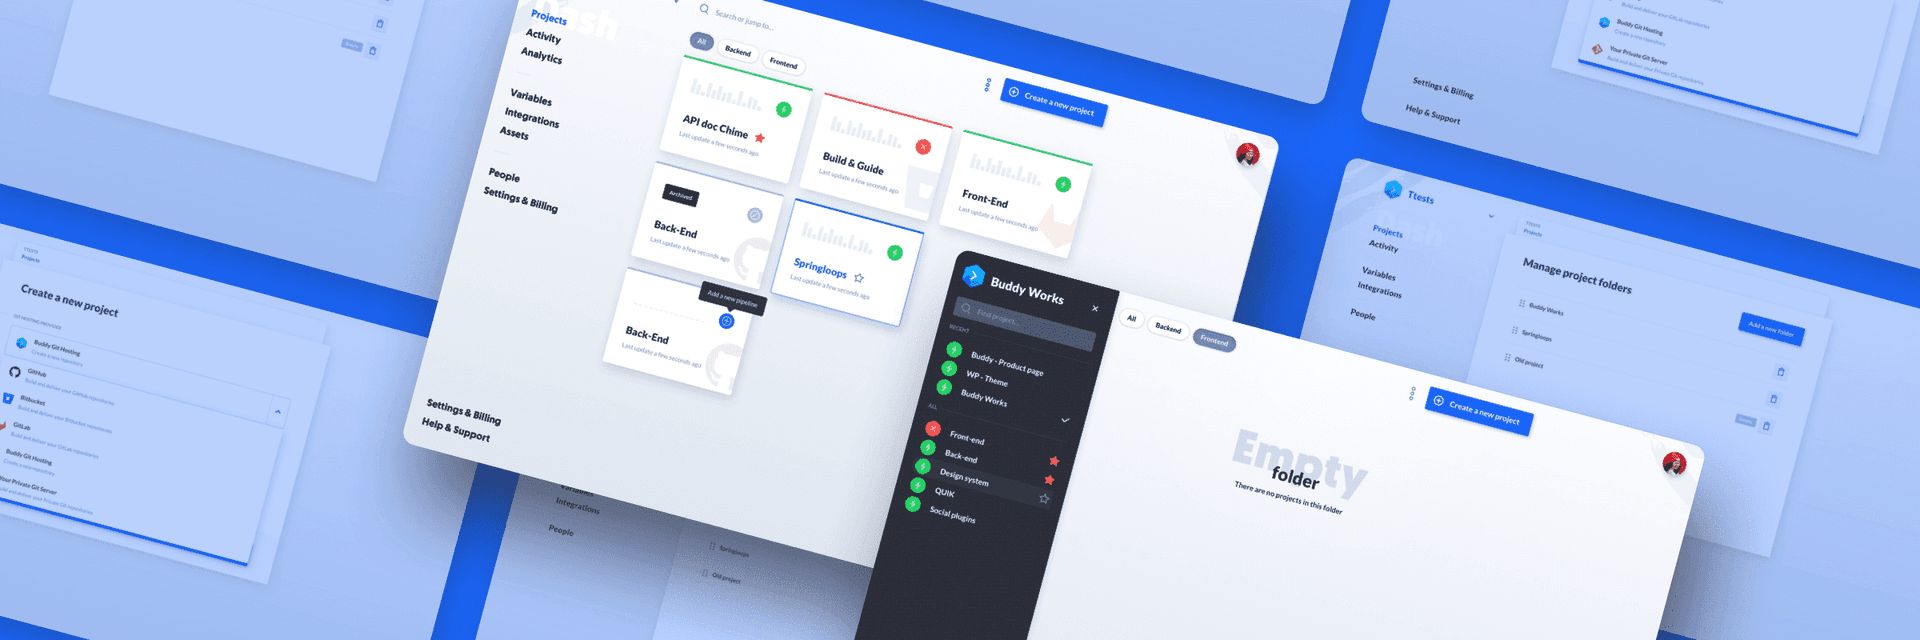 Buddy 2.0: New projects view, workspace navigation, and more 🔥